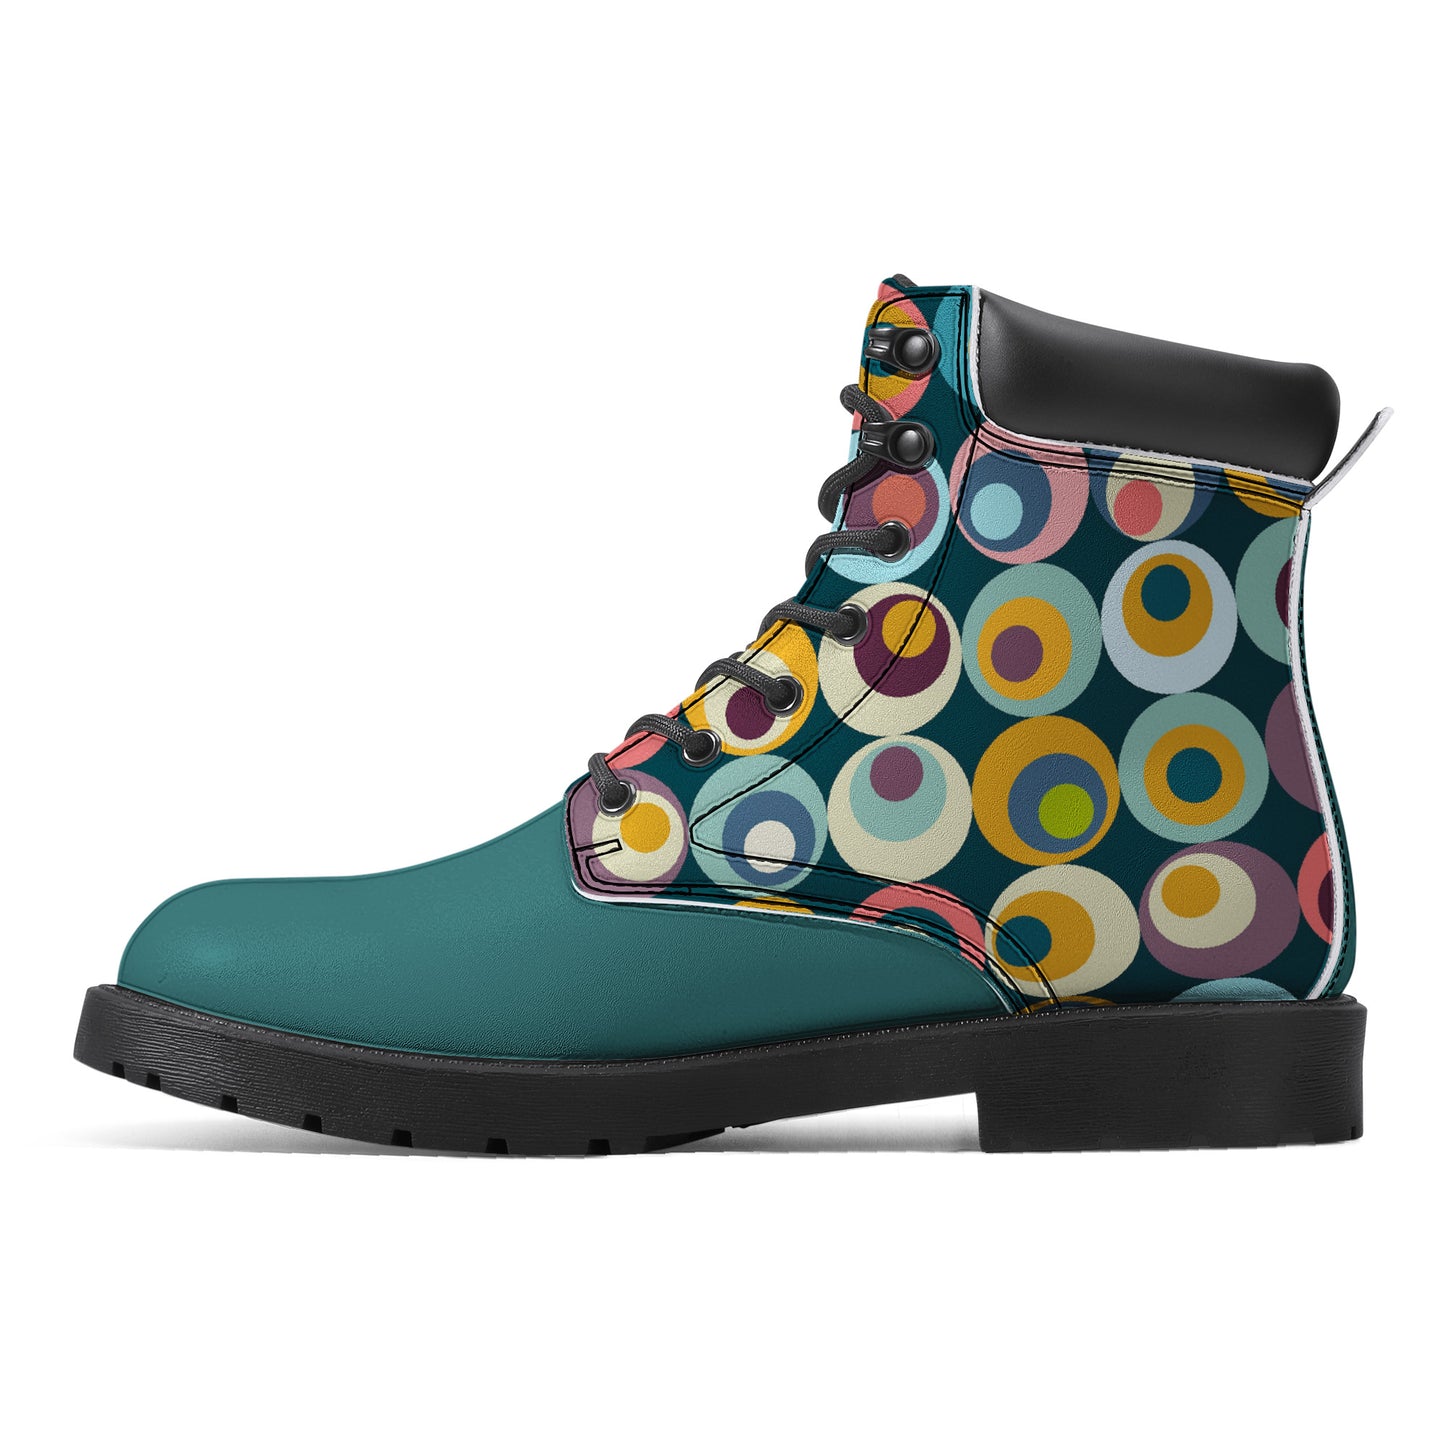 Unisex Synthetic Leather Boots With Cuff - Turquoise